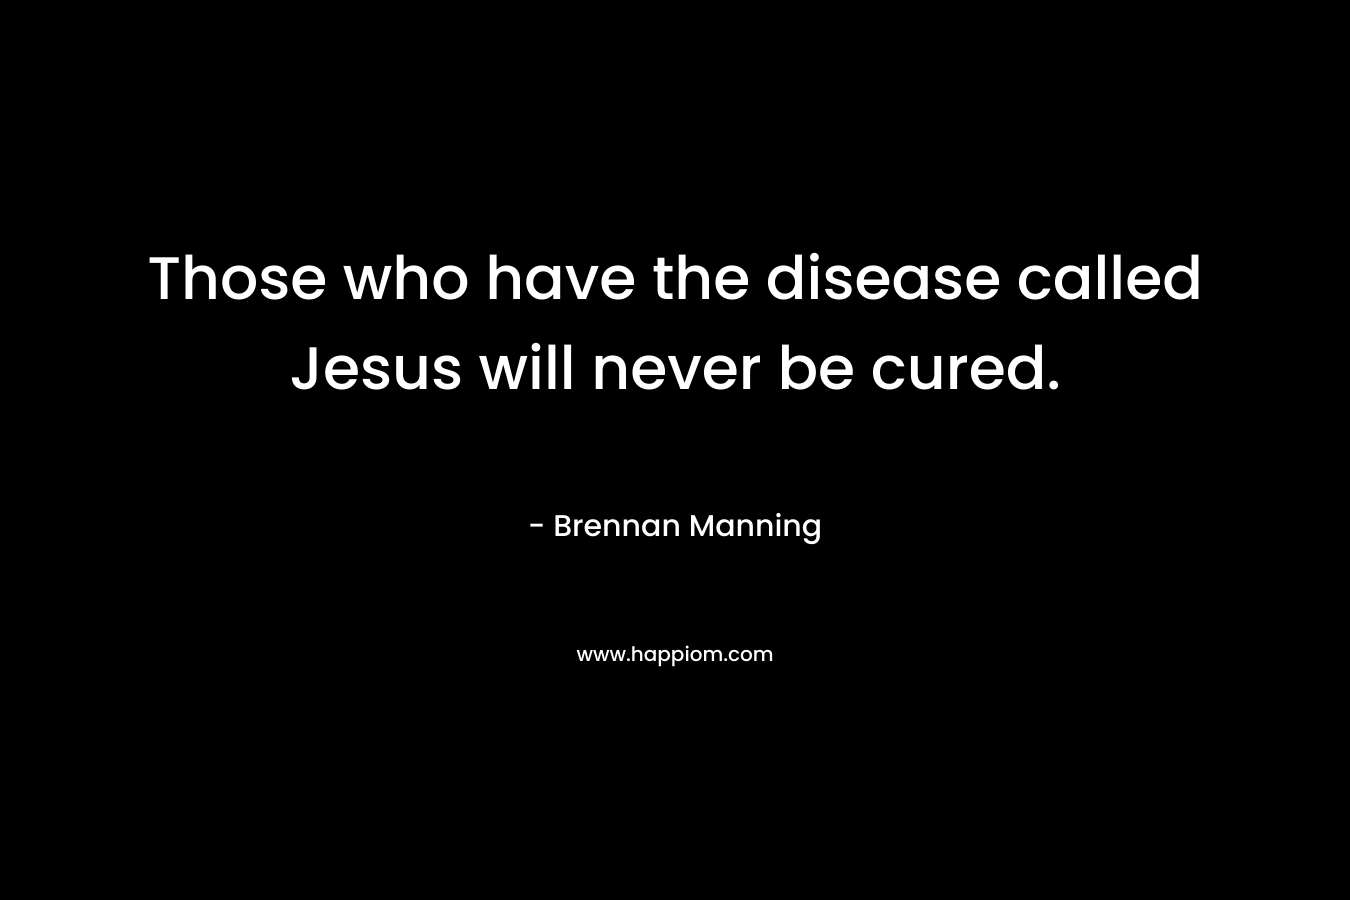 Those who have the disease called Jesus will never be cured. – Brennan Manning